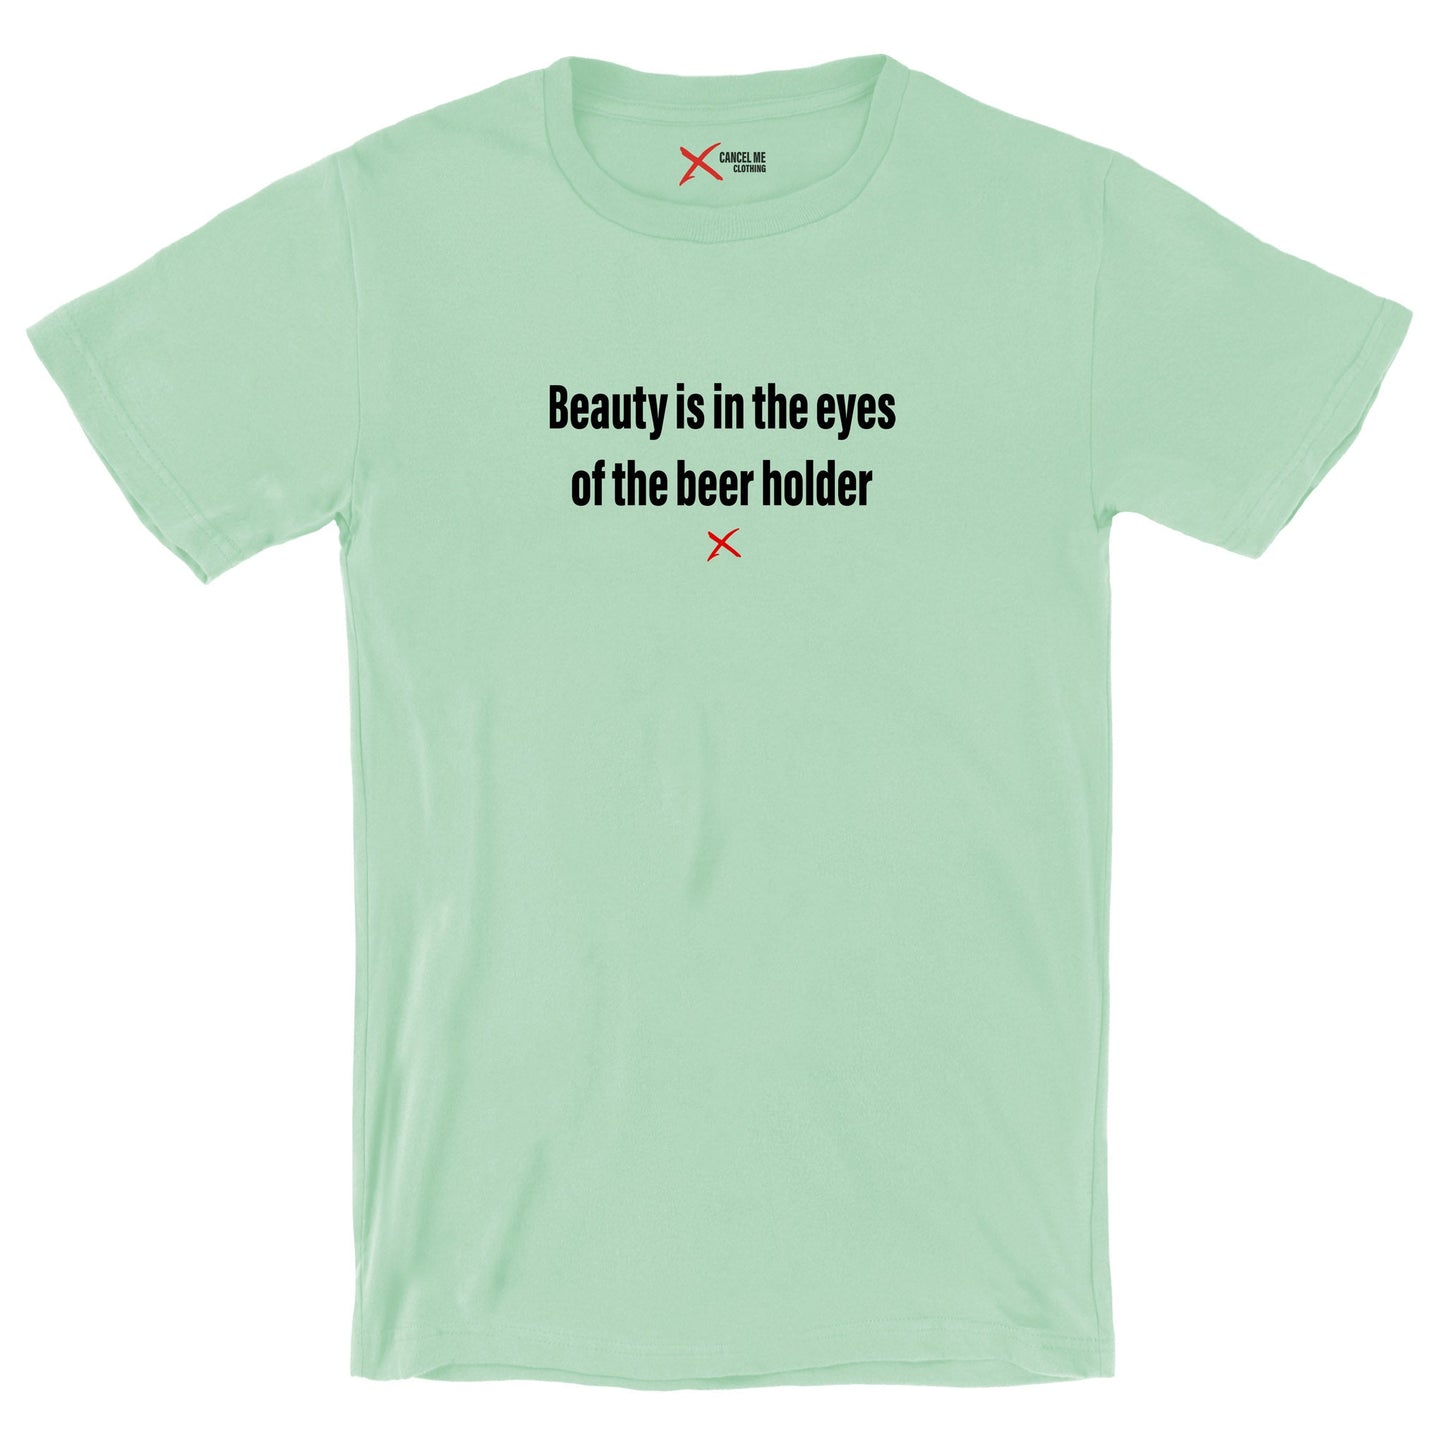 Beauty is in the eyes of the beer holder - Shirt